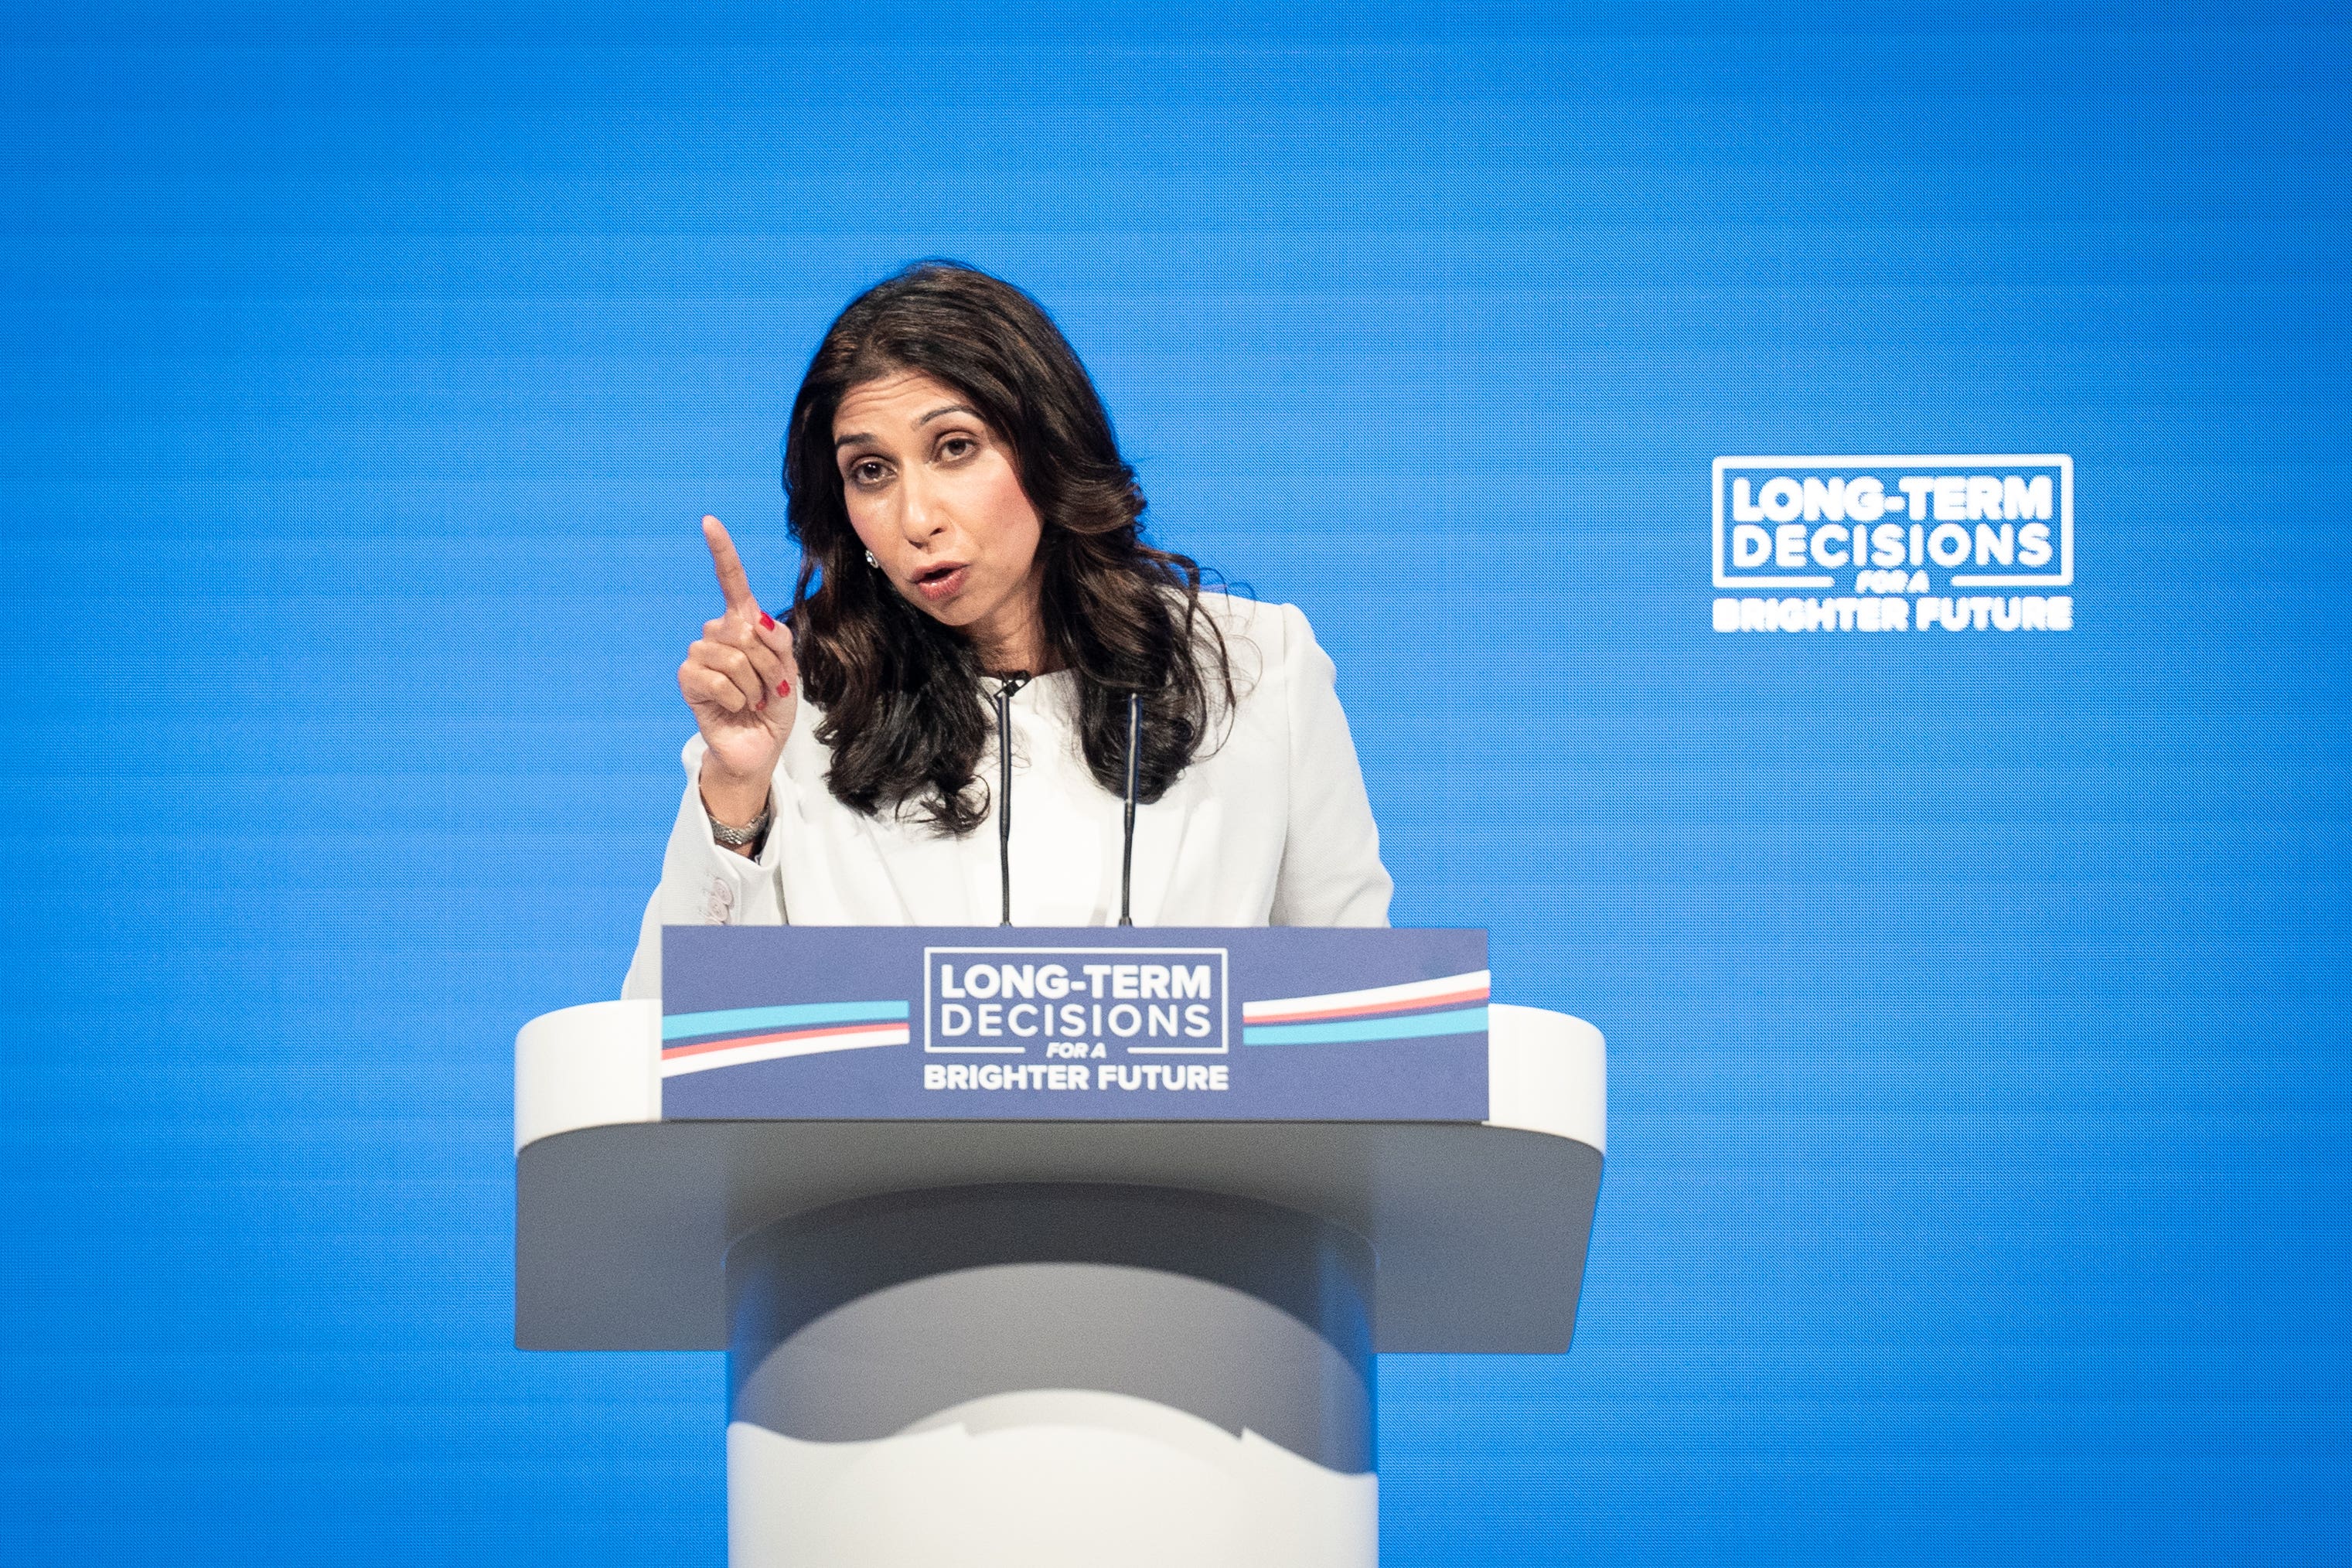 Suella Braverman’s speech at the Conservatives’ conference raised eyebrows for some of the language she used